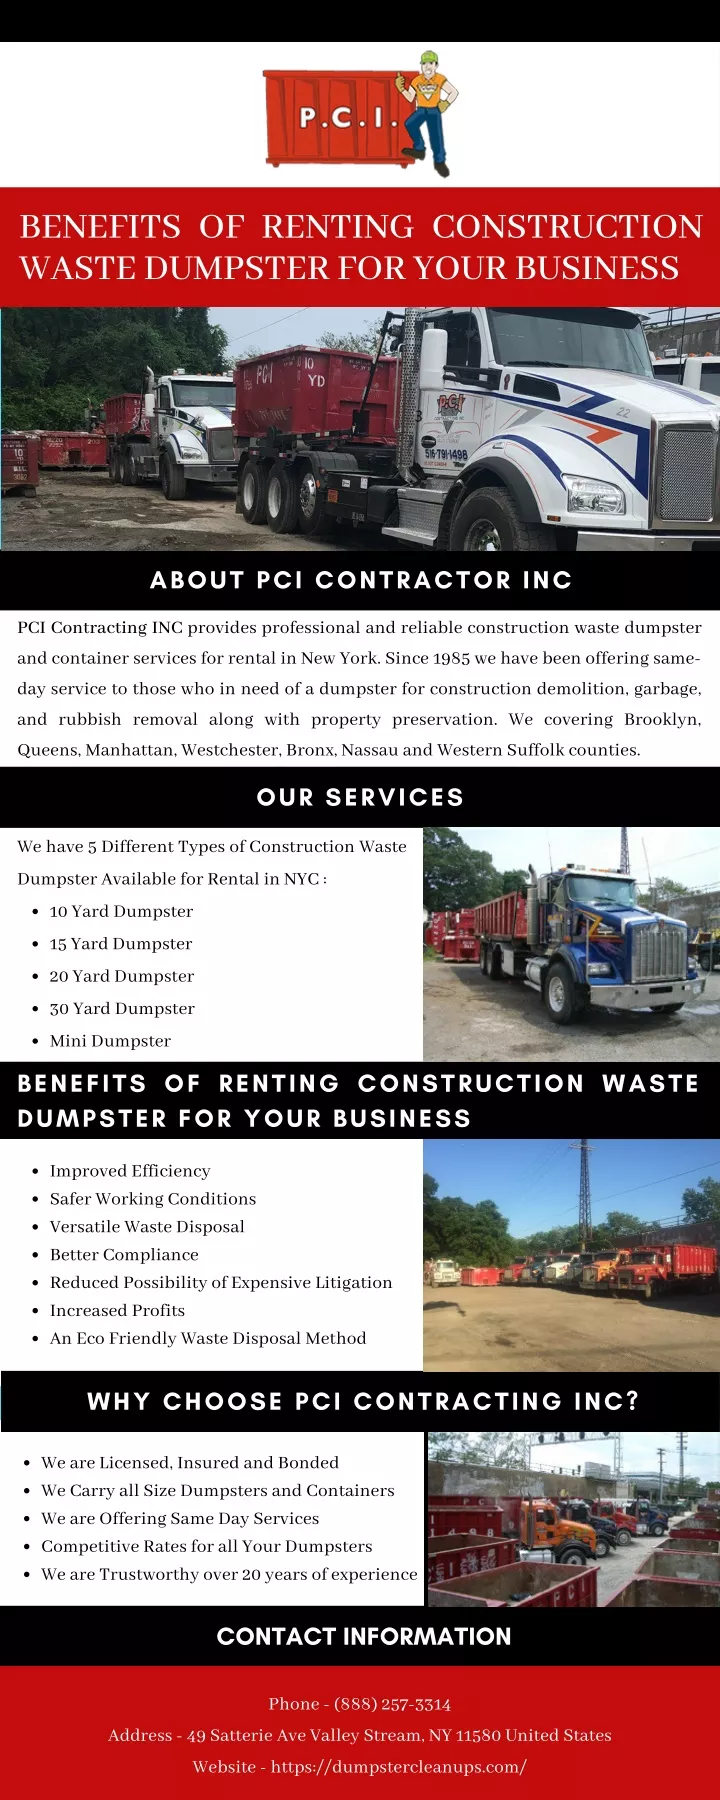 benefits of renting construction waste dumpster